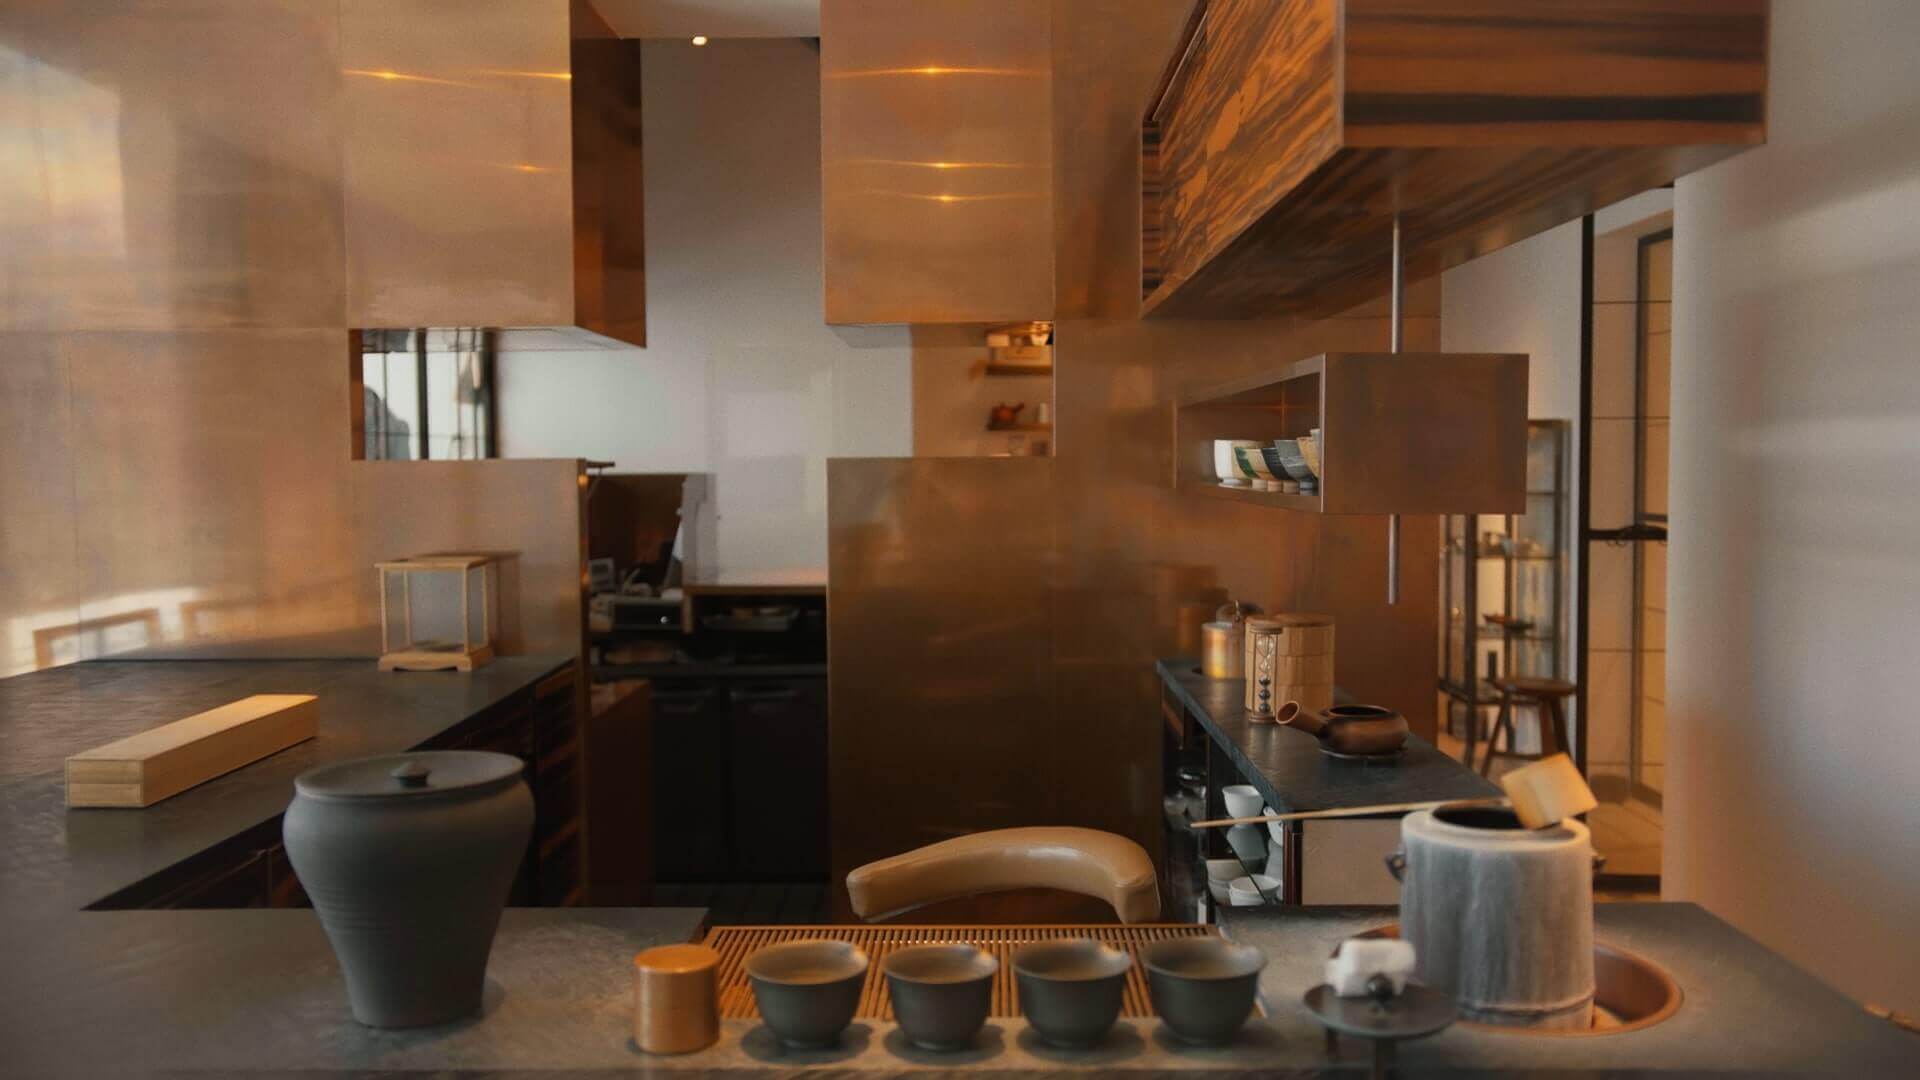 Image of a clean and modern kitchen